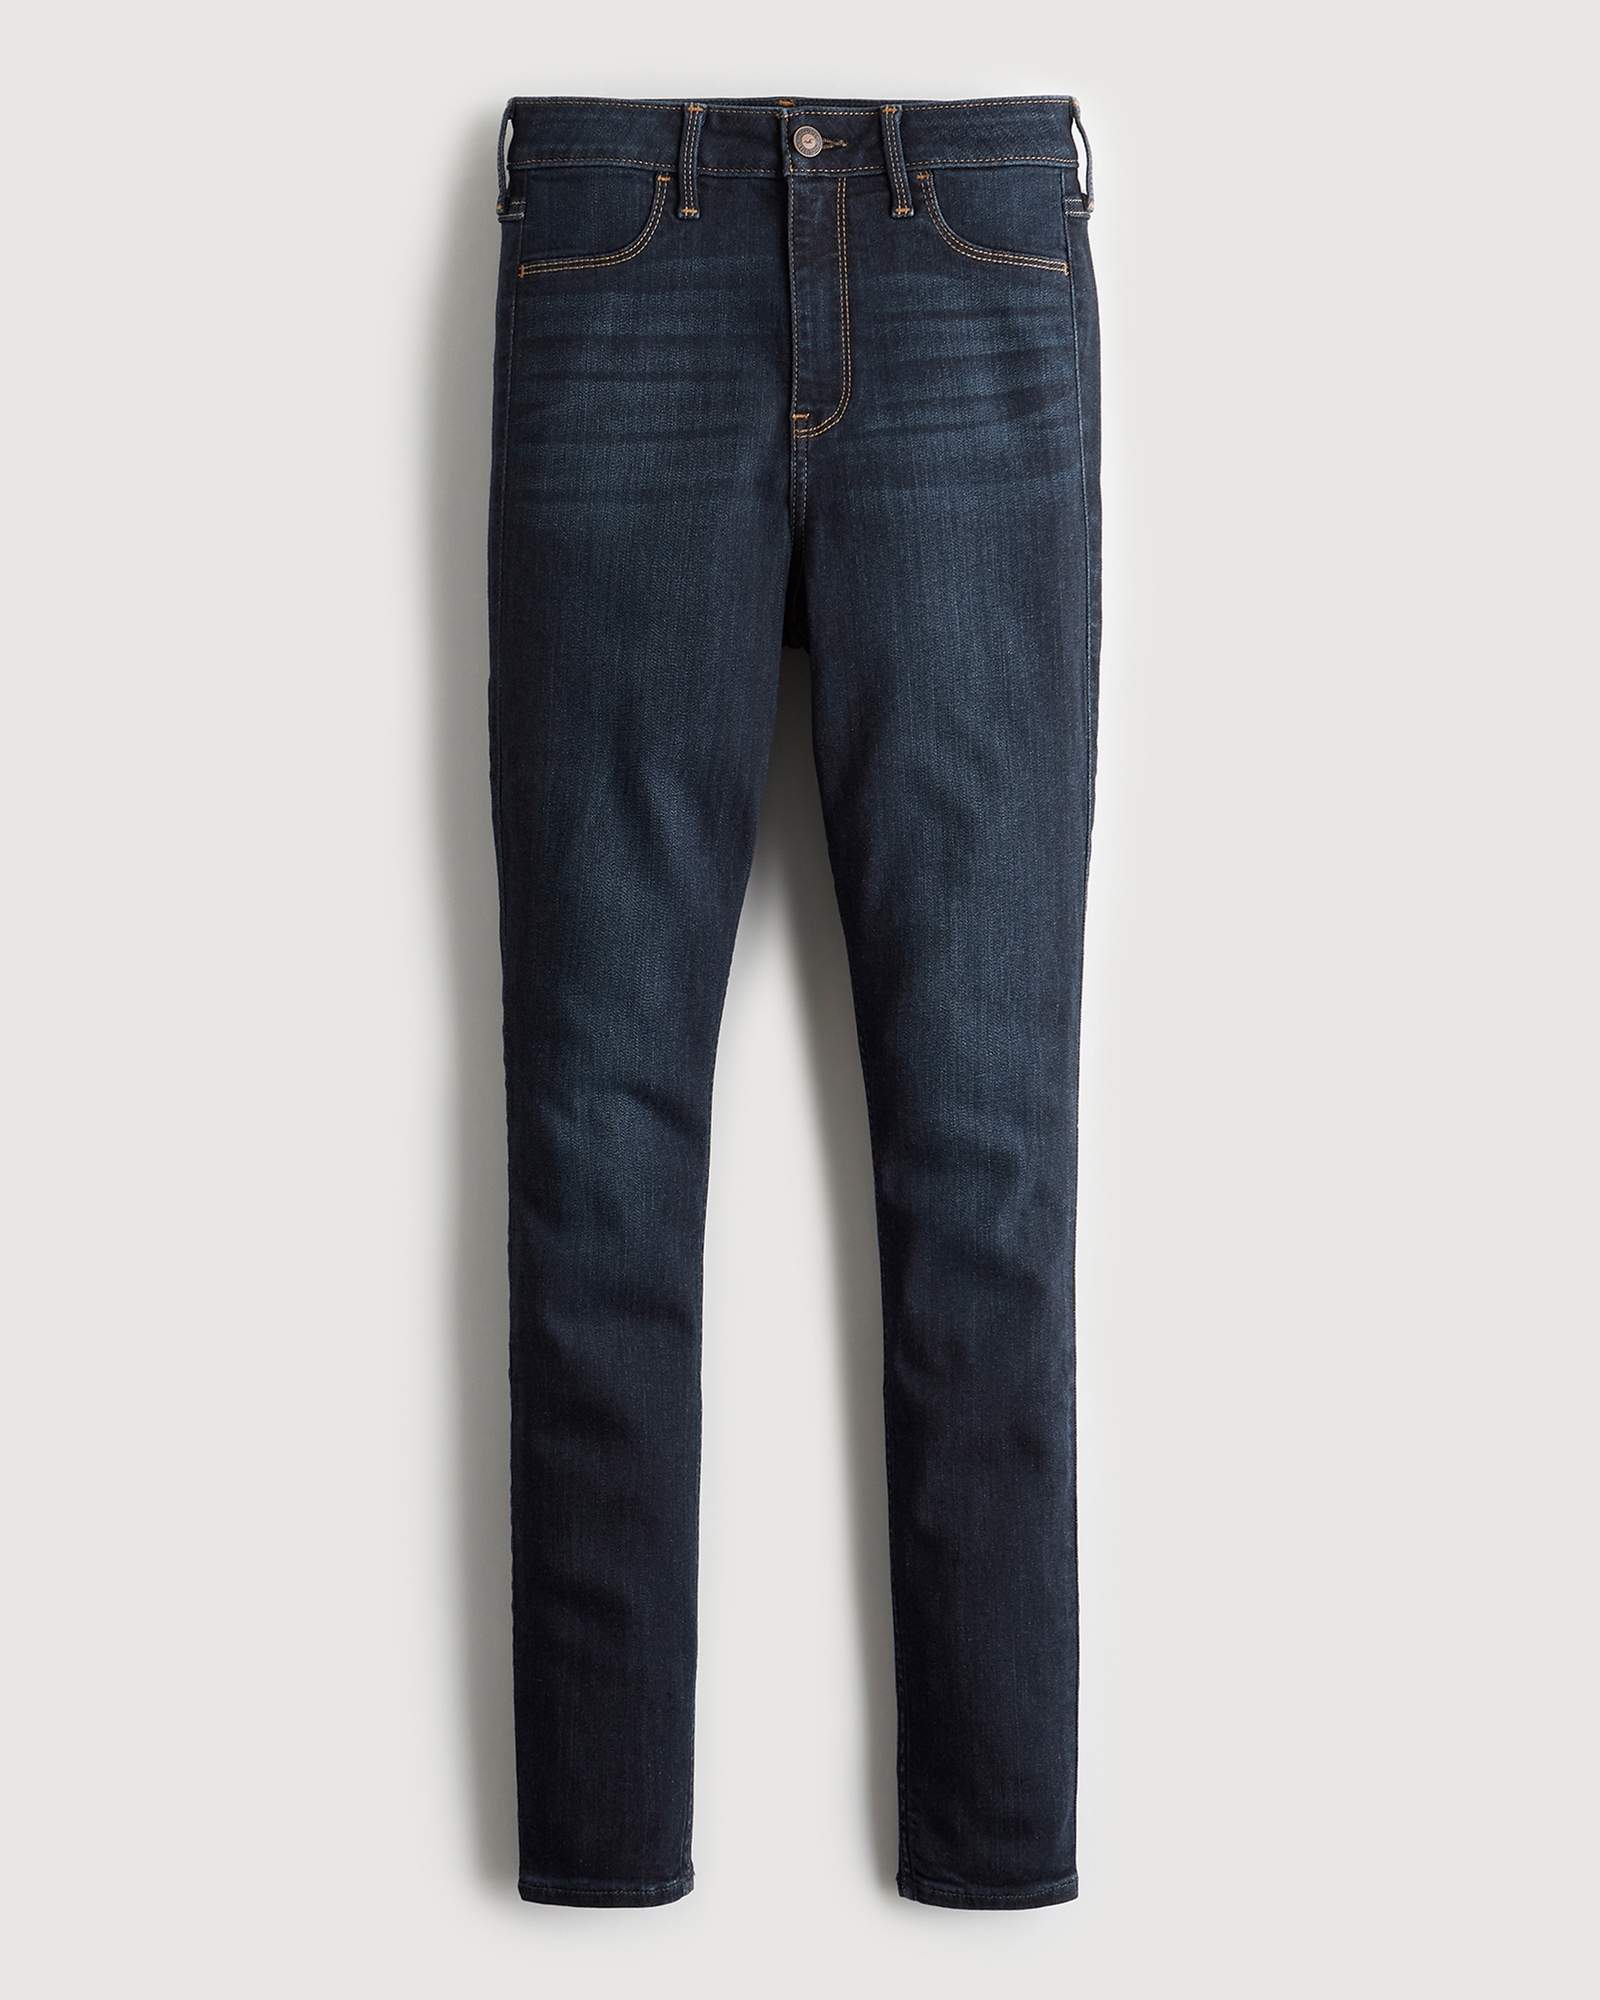 Trendy Hollister Jeans ONLY $25 (+ $10 Off $40 for New Members